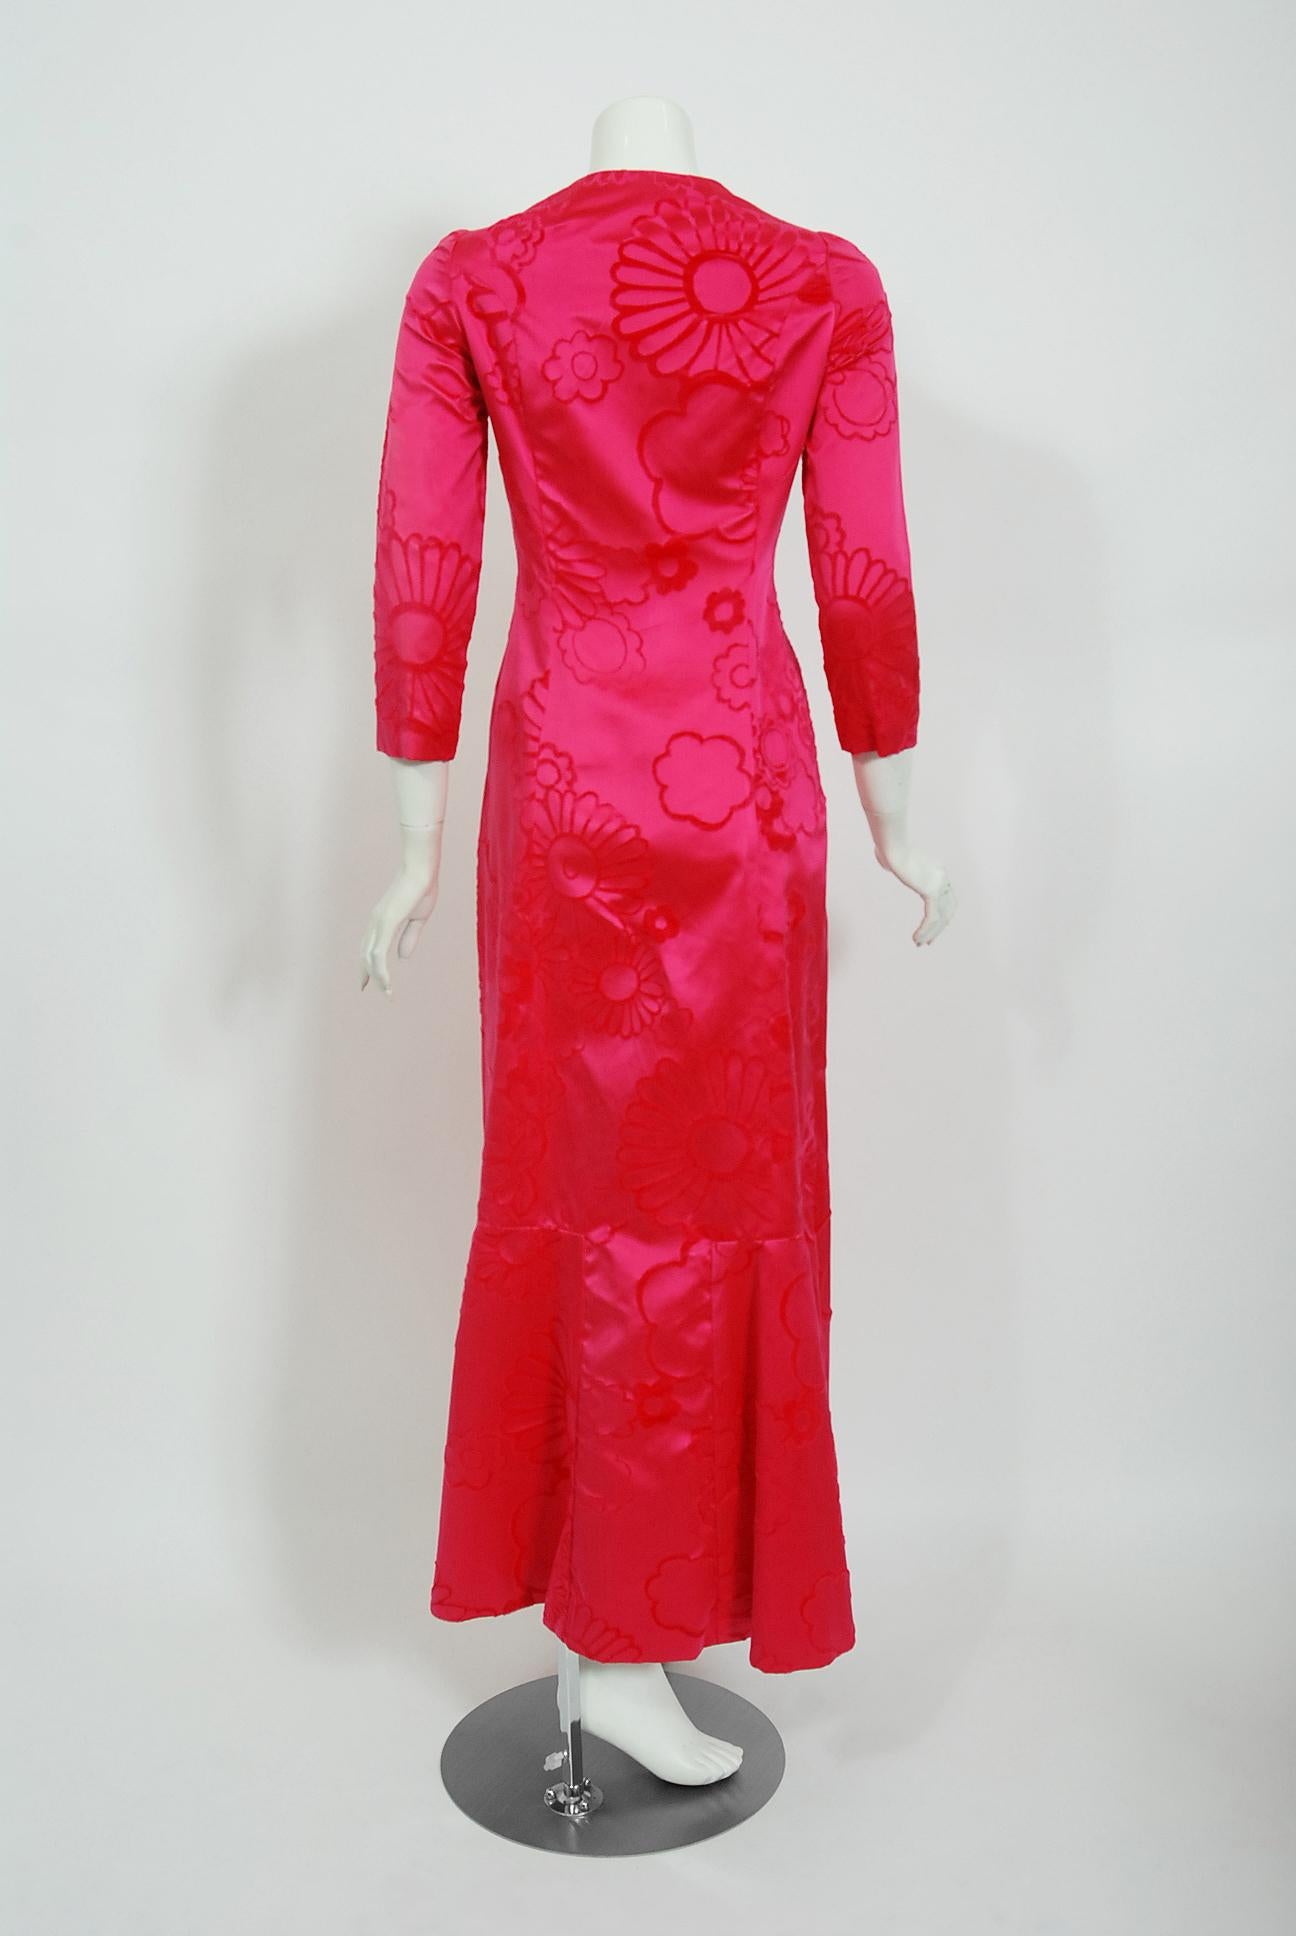 Vintage 1970 Mainbocher Couture Vogue Documented Hot Pink Flocked Silk Dress For Sale 2